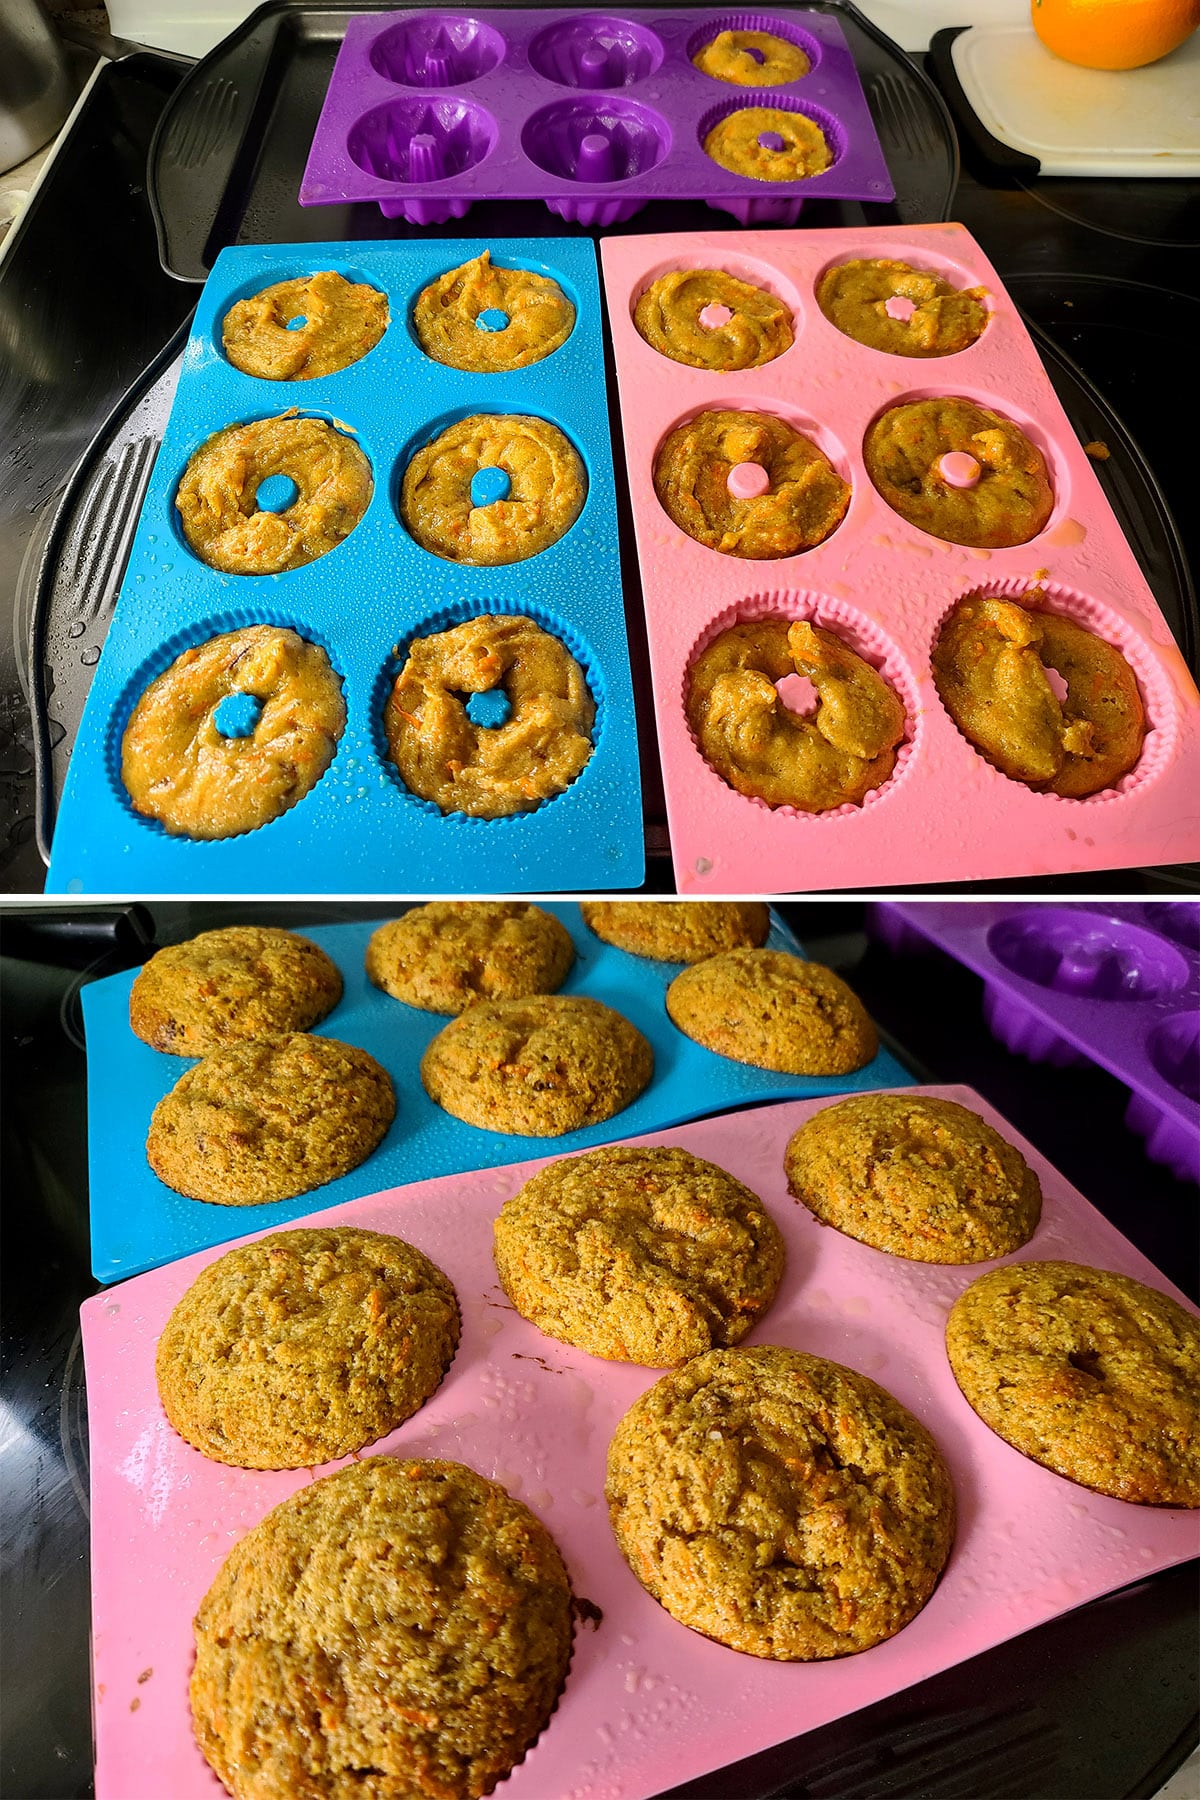 2 pans of mini keto carrot bundt cakes, before and after baking.